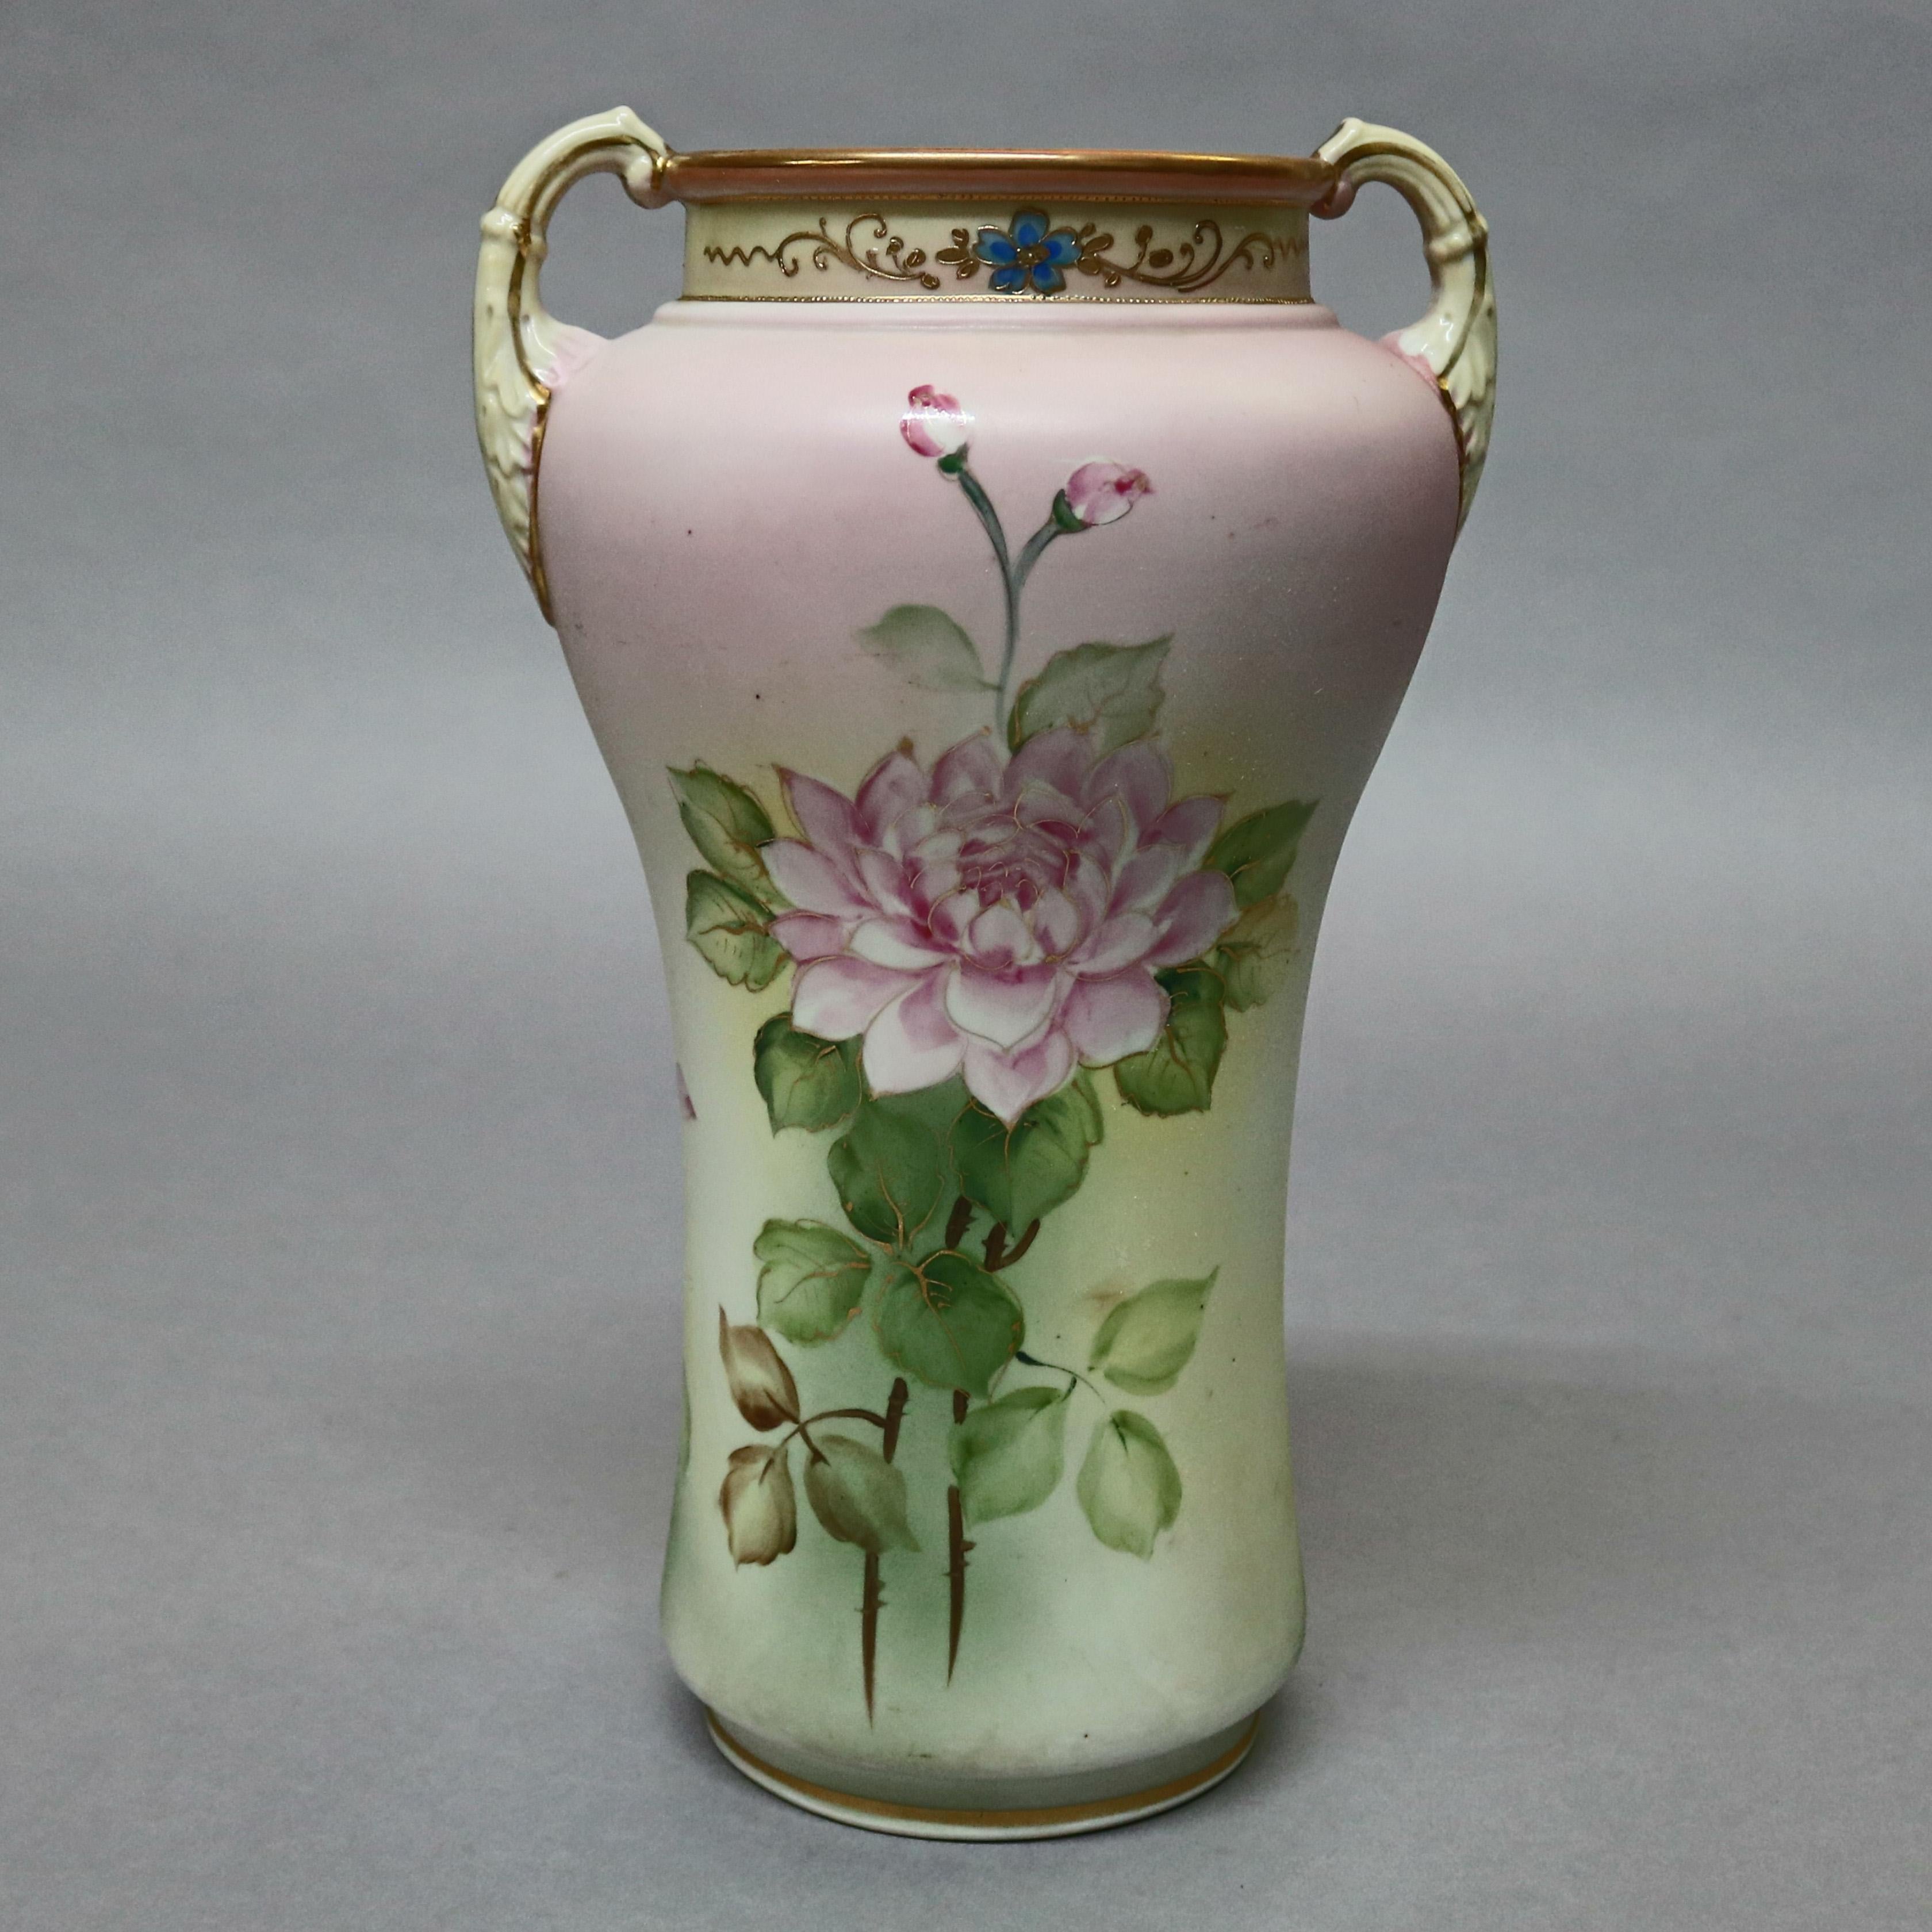 An antique Japanese Nippon porcelain vase offers urn form with gilt double foliate form handles vessel with hand painted floral motif with gold gilt highlights, and neck having blue and gold floral vine, stamped on base as photographed, circa